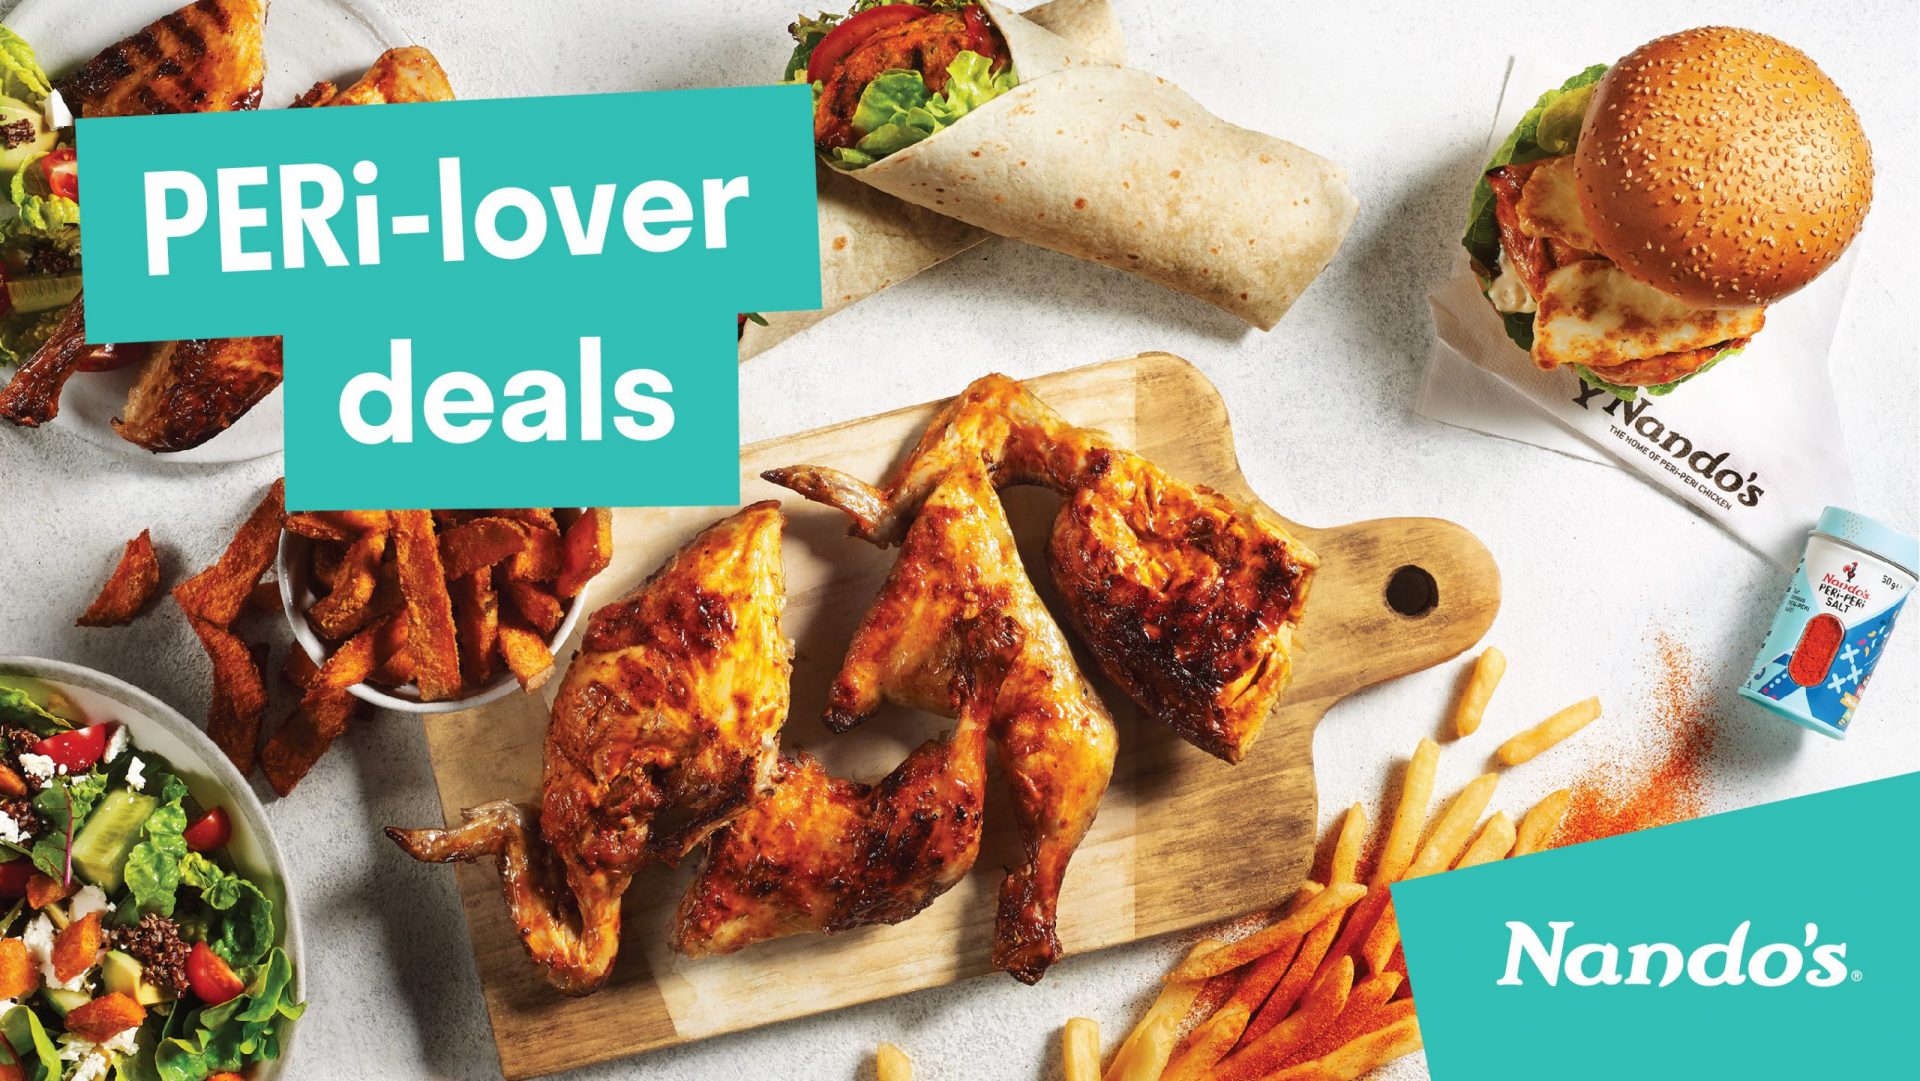 DEAL: Nando's - 30% off for Deliveroo Plus Members 9